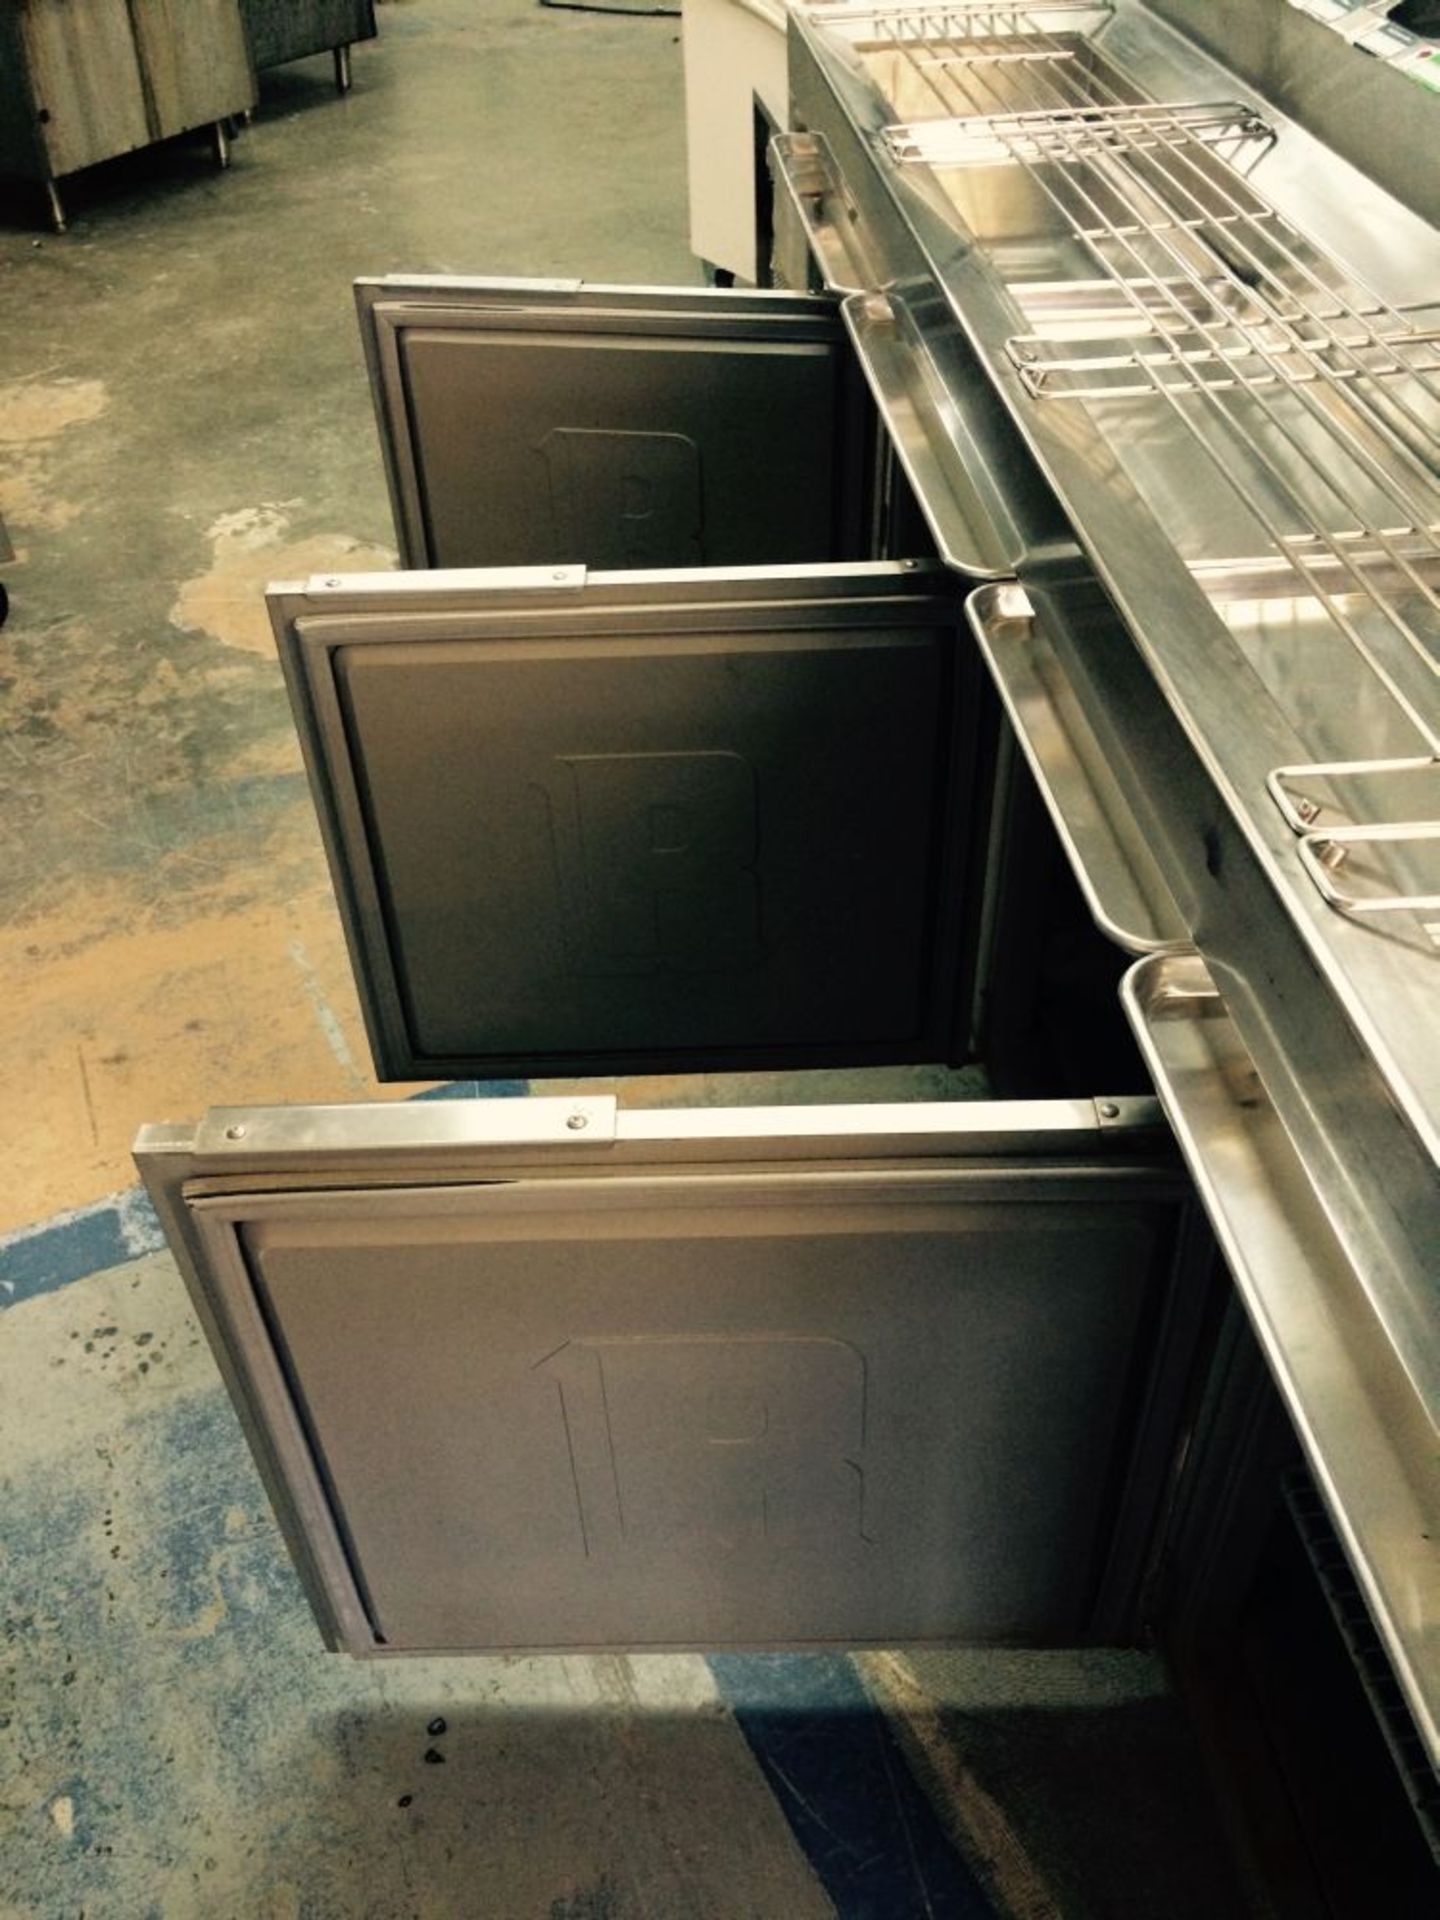 Randell Pizza Prep Table - Model DPM102L FOB Kelowna Contact Jerry For Details 604-808-5900 - Image 3 of 5